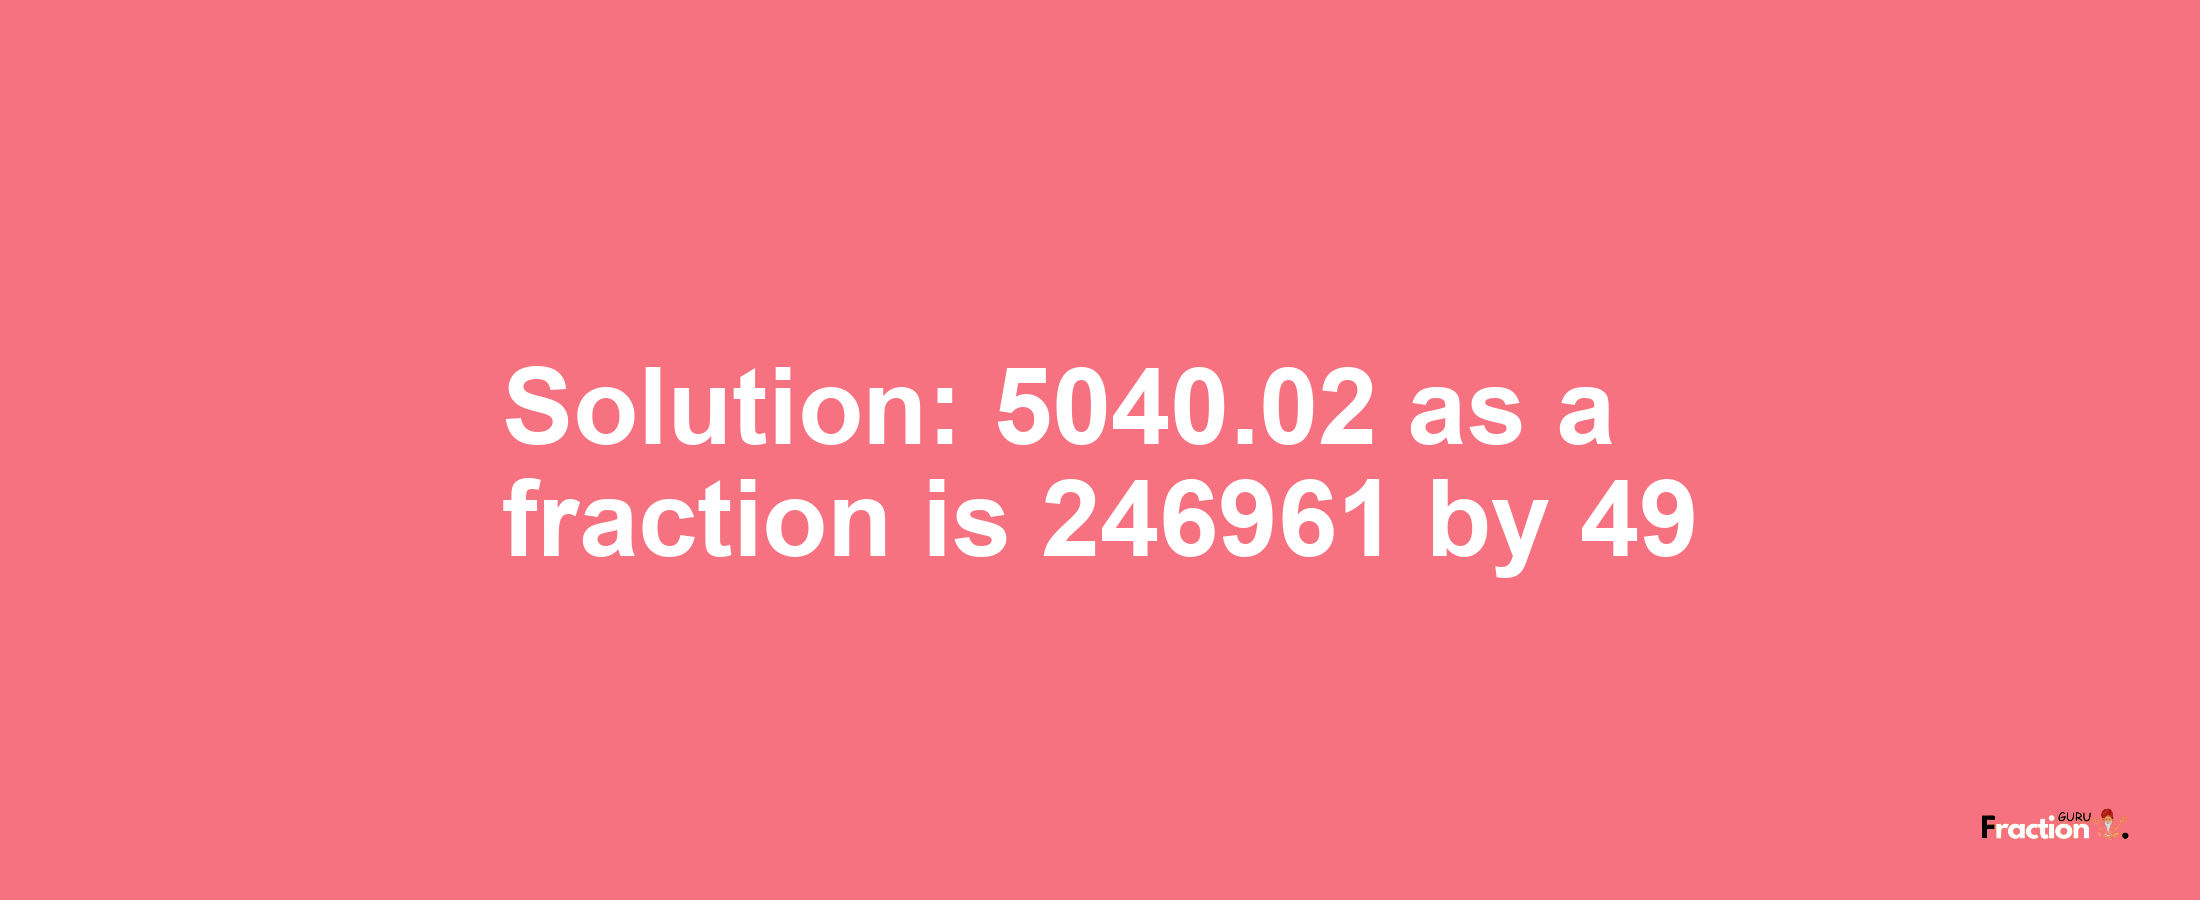 Solution:5040.02 as a fraction is 246961/49